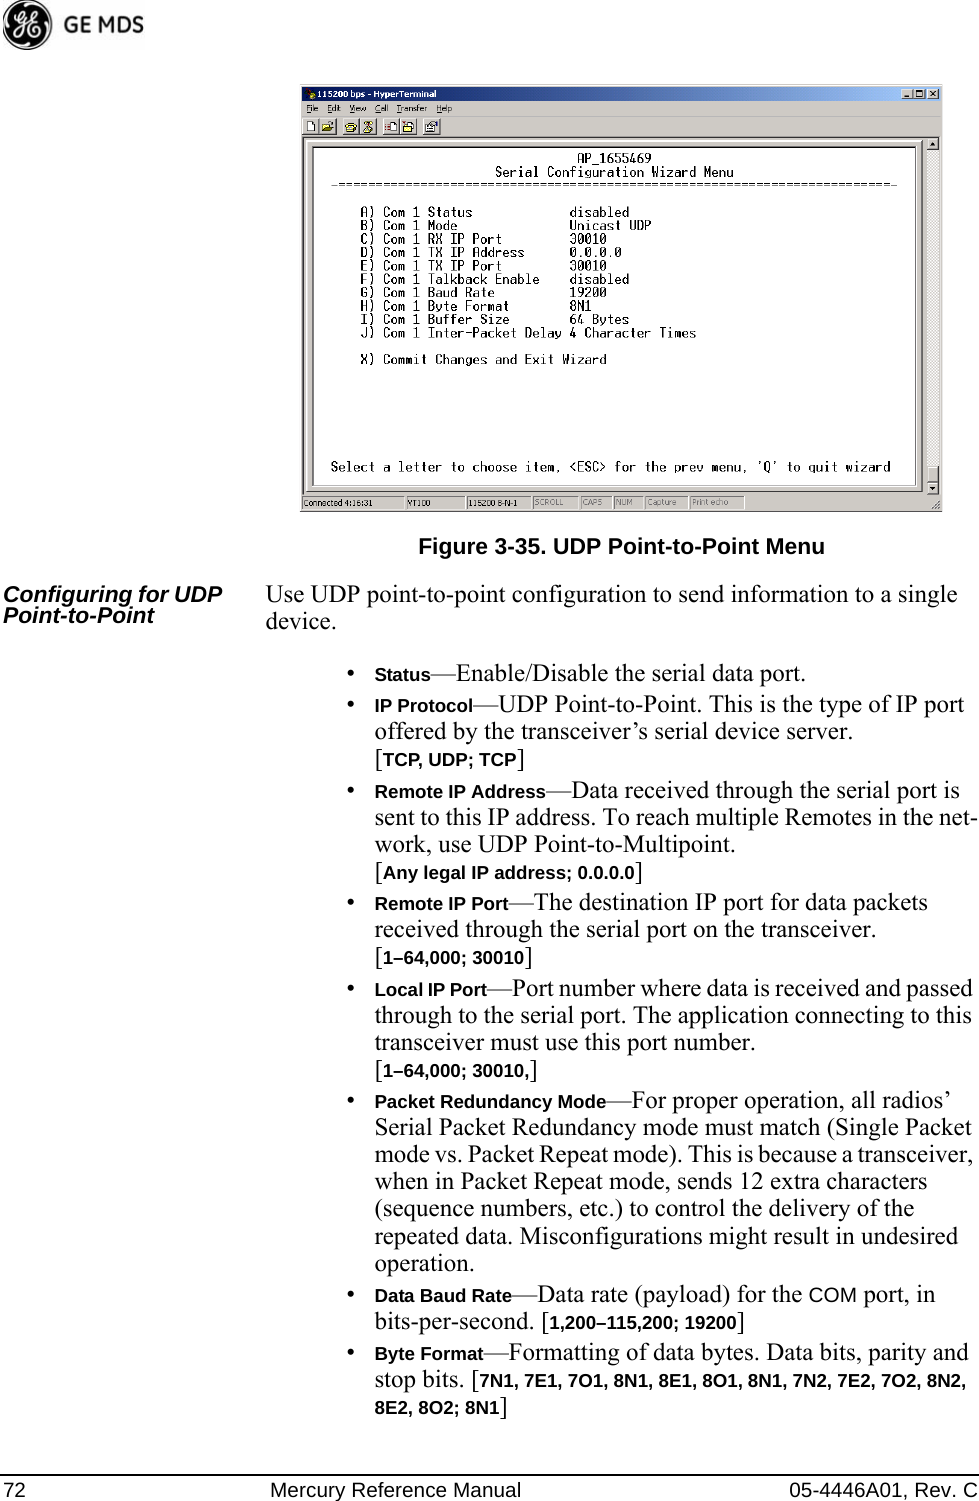 72 Mercury Reference Manual 05-4446A01, Rev. CInvisible place holderFigure 3-35. UDP Point-to-Point MenuConfiguring for UDP Point-to-Point Use UDP point-to-point configuration to send information to a single device.•Status—Enable/Disable the serial data port. •IP Protocol—UDP Point-to-Point. This is the type of IP port offered by the transceiver’s serial device server. [TCP, UDP; TCP]•Remote IP Address—Data received through the serial port is sent to this IP address. To reach multiple Remotes in the net-work, use UDP Point-to-Multipoint. [Any legal IP address; 0.0.0.0]•Remote IP Port—The destination IP port for data packets received through the serial port on the transceiver. [1–64,000; 30010]•Local IP Port—Port number where data is received and passed through to the serial port. The application connecting to this transceiver must use this port number.[1–64,000; 30010,]•Packet Redundancy Mode—For proper operation, all radios’ Serial Packet Redundancy mode must match (Single Packet mode vs. Packet Repeat mode). This is because a transceiver, when in Packet Repeat mode, sends 12 extra characters (sequence numbers, etc.) to control the delivery of the repeated data. Misconfigurations might result in undesired operation.•Data Baud Rate—Data rate (payload) for the COM port, in bits-per-second. [1,200–115,200; 19200] •Byte Format—Formatting of data bytes. Data bits, parity and stop bits. [7N1, 7E1, 7O1, 8N1, 8E1, 8O1, 8N1, 7N2, 7E2, 7O2, 8N2, 8E2, 8O2; 8N1] 